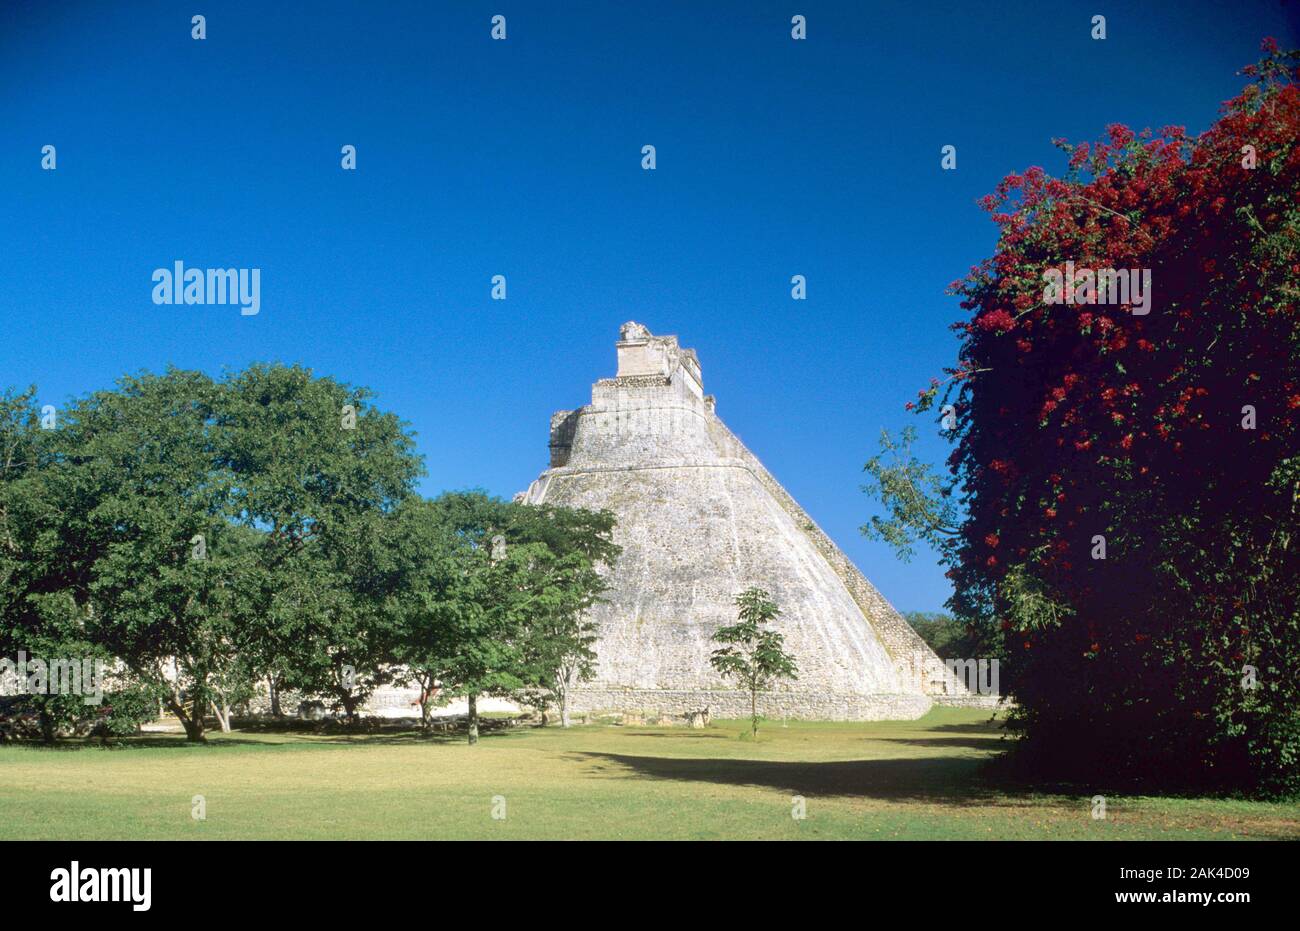 Mexico: the pyramid of the wizzard in the Maya city Uxmal | usage worldwide Stock Photo